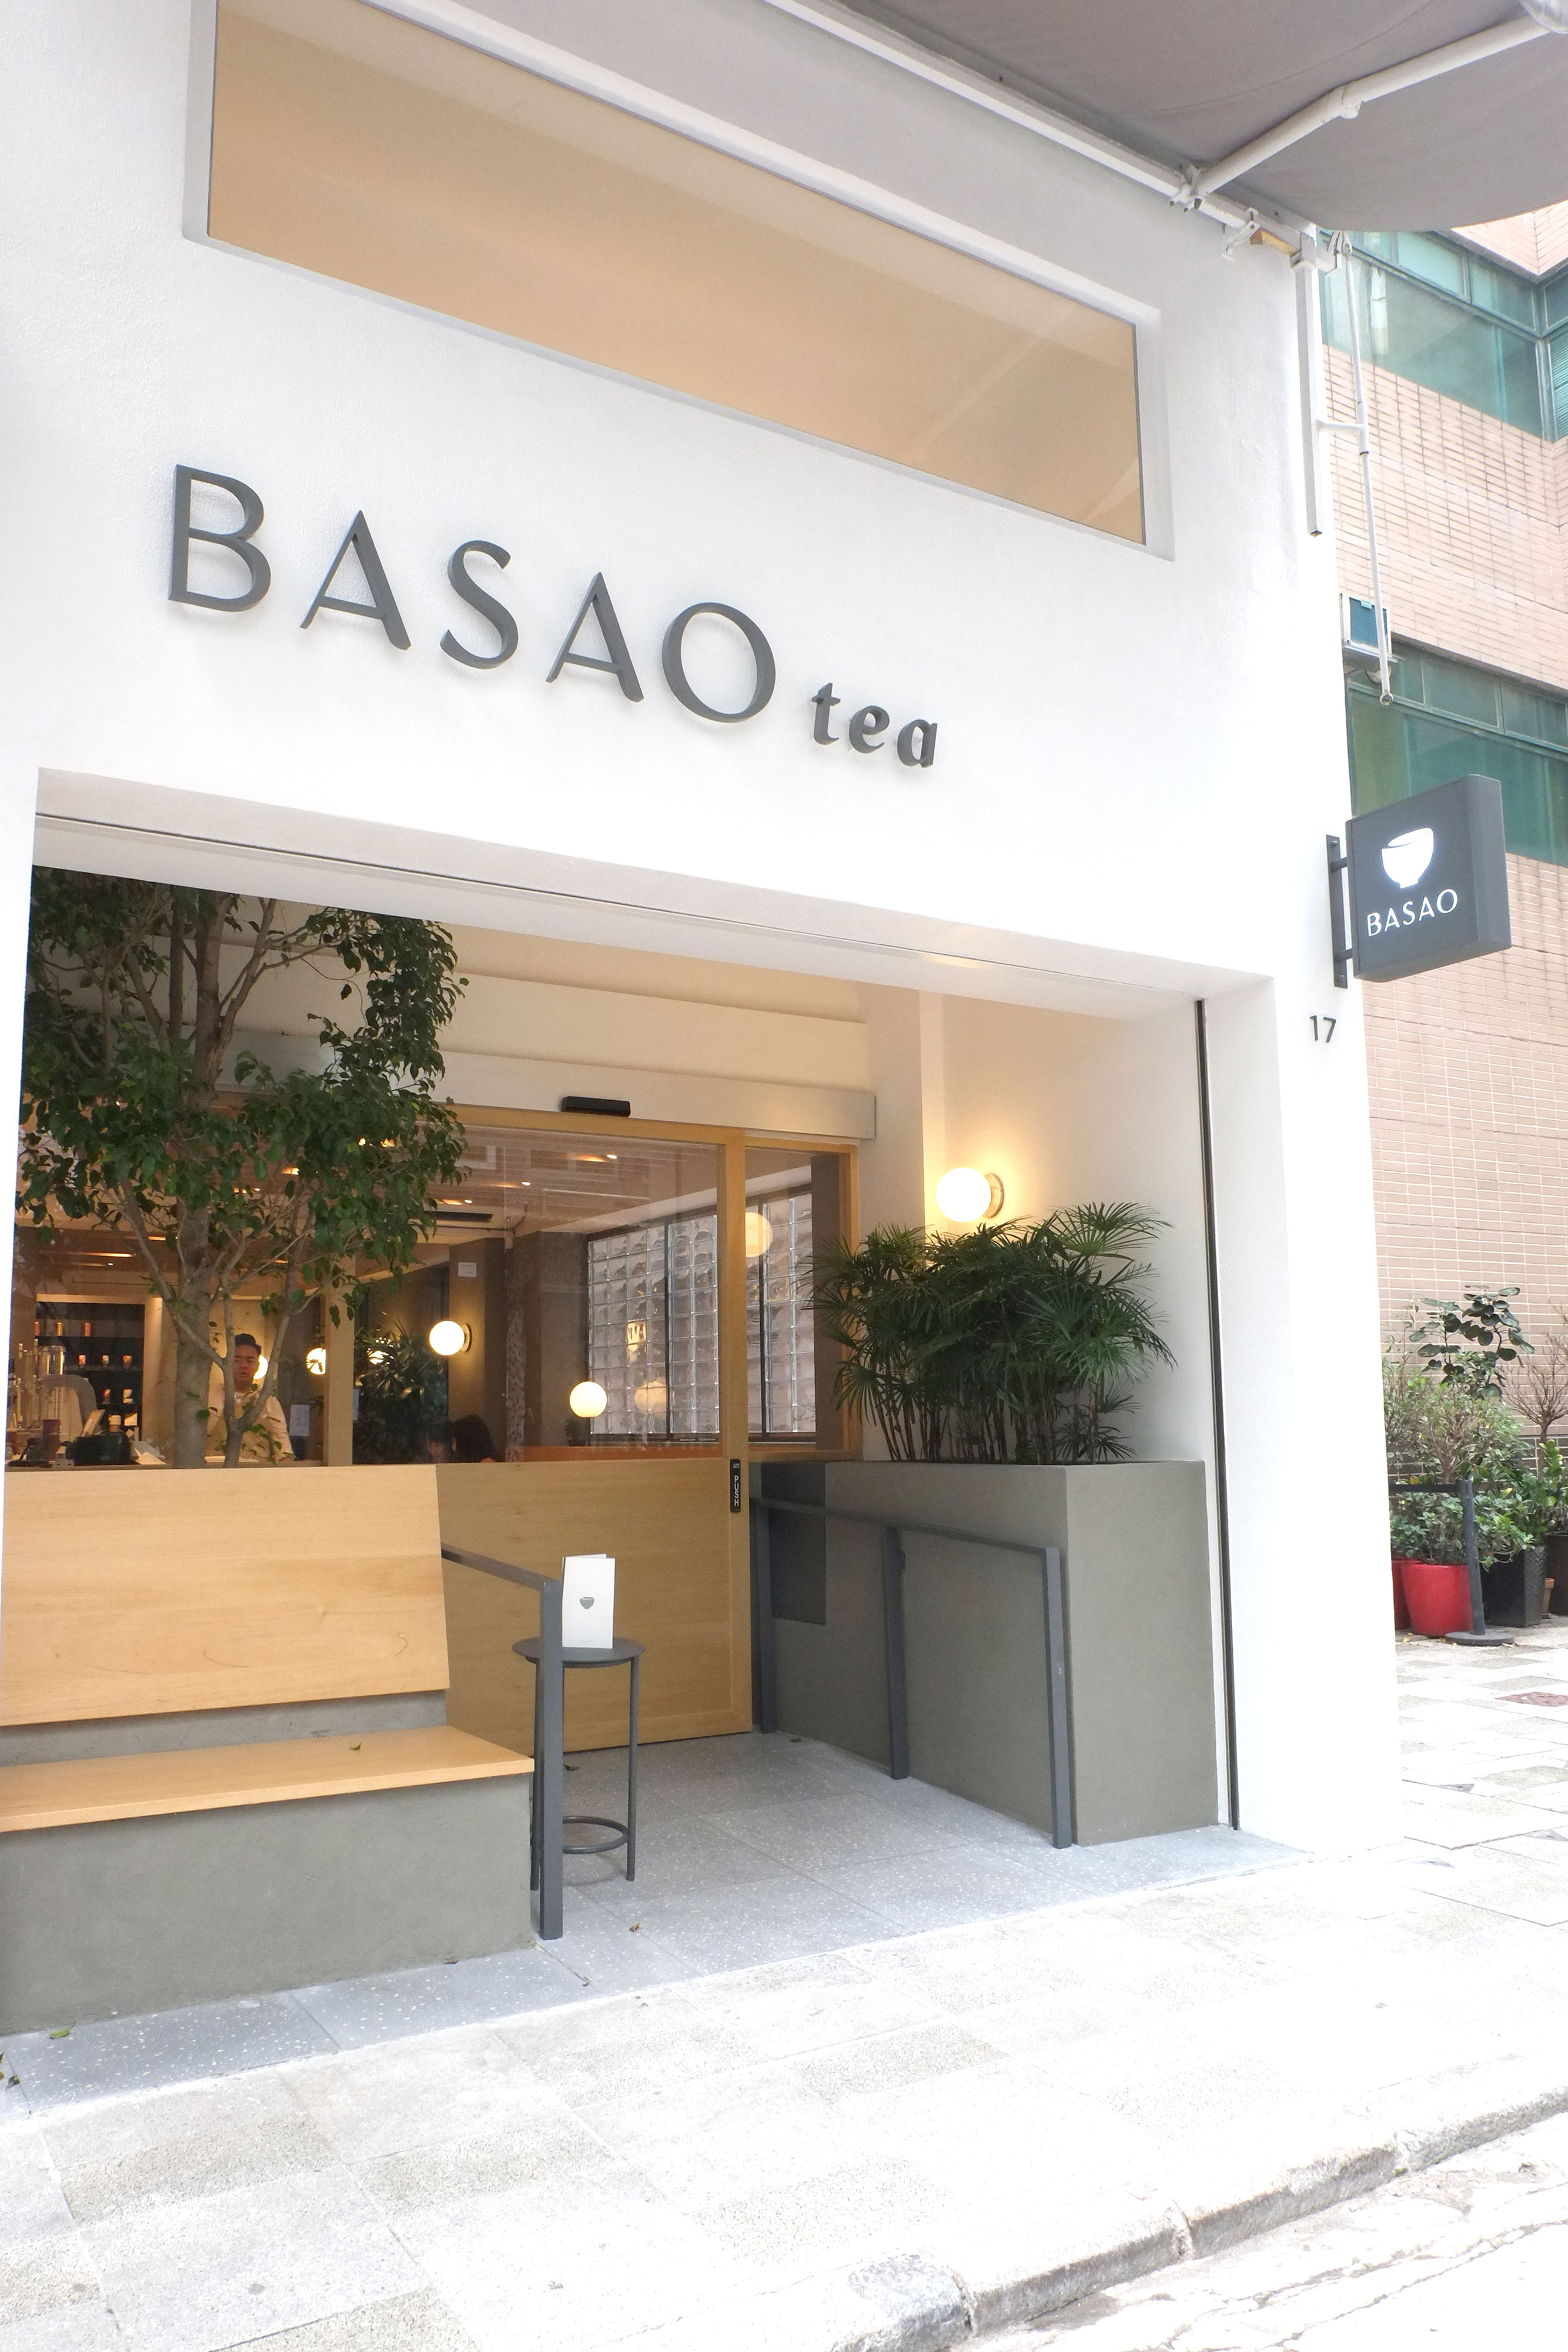 BASAO tea bar: A humble cafe to check out in Moon Street